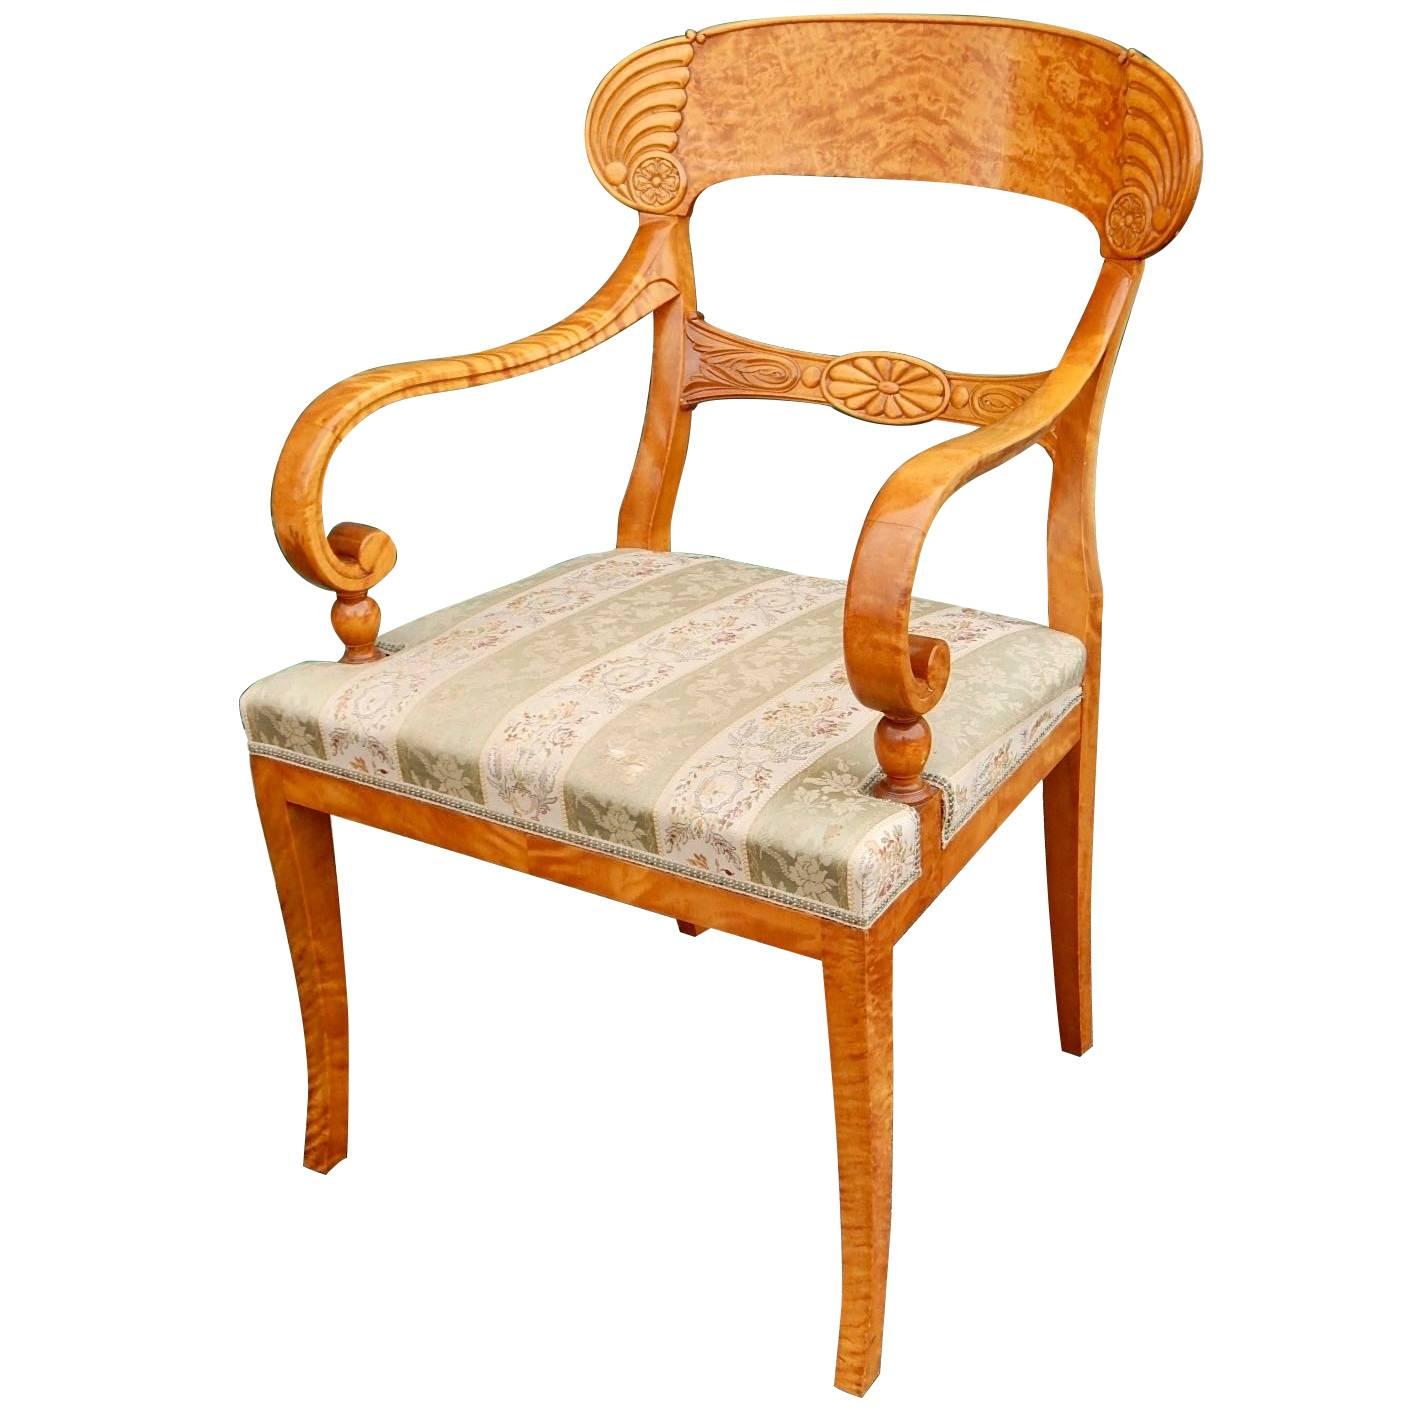 Pair of Swedish Biedermeier Revival Captains Chairs in Golden Flame Birch 1920s